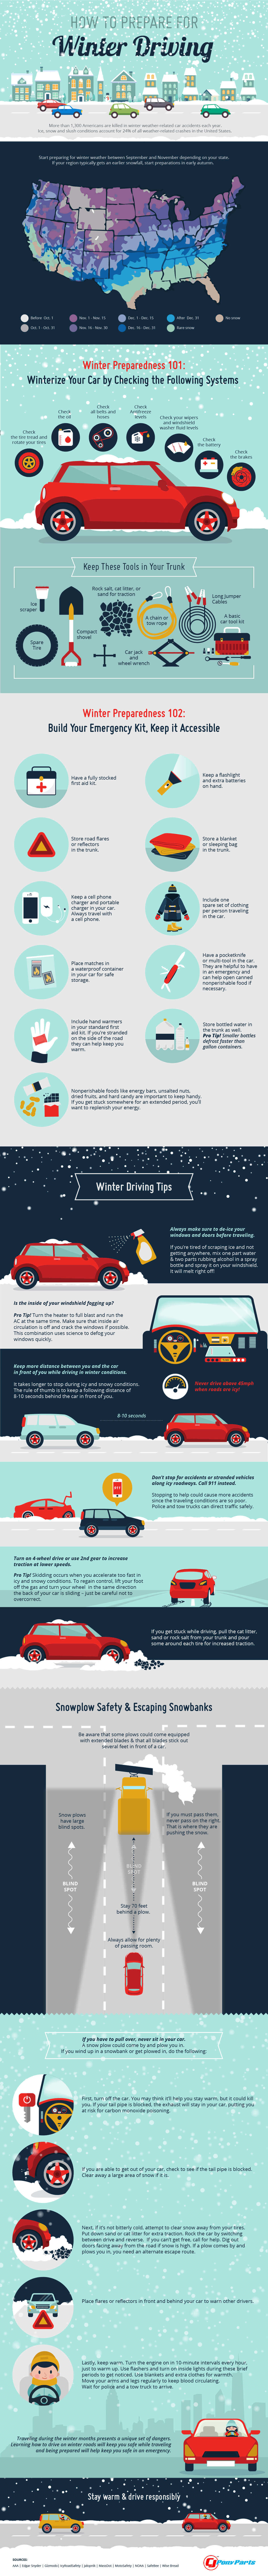 How to Prepare for Winter Driving